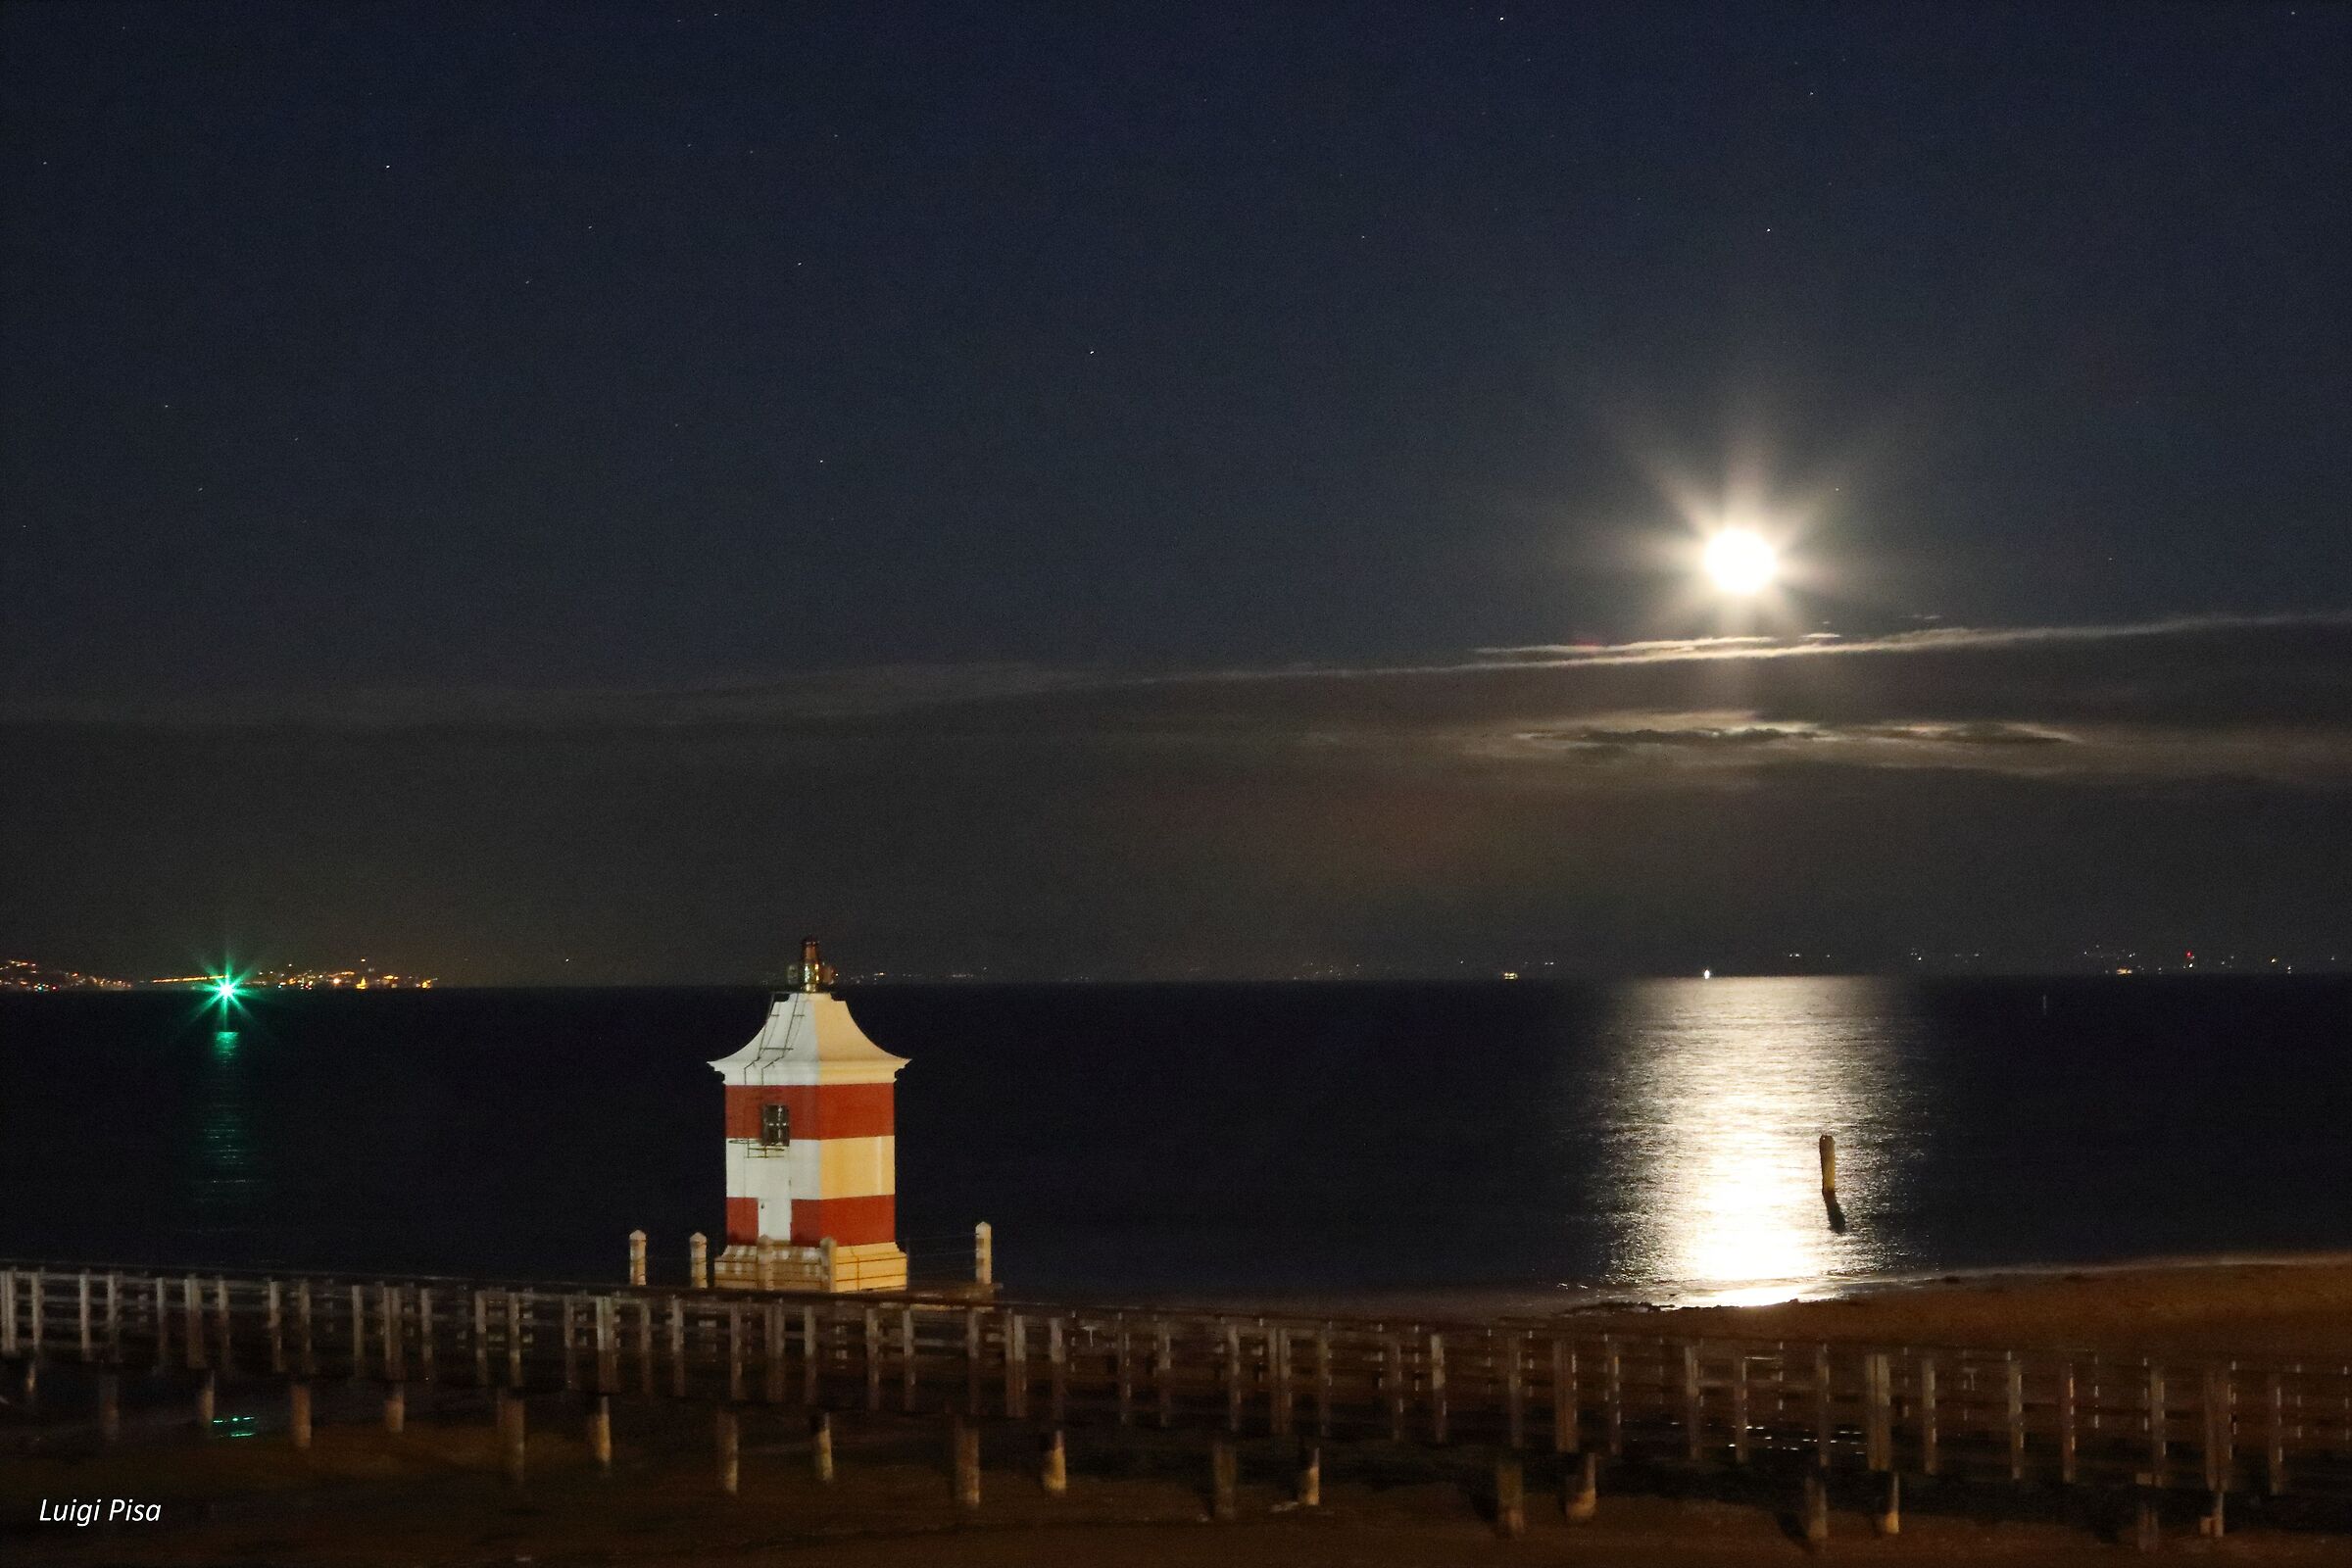 Reflection of the Moon in Lignano...